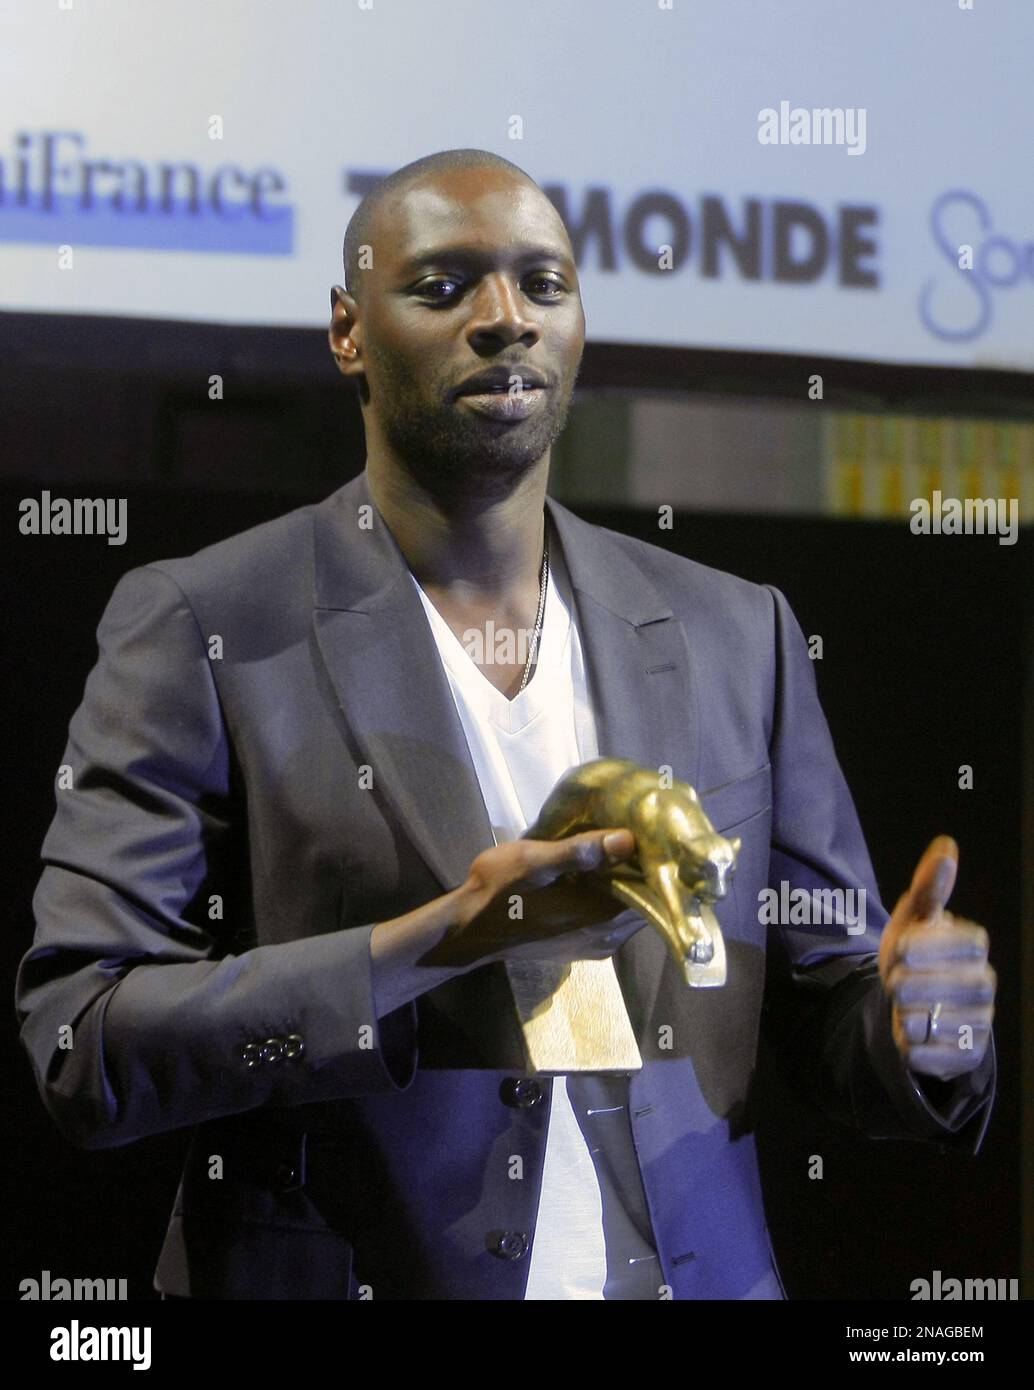 French Actor Omar Sy shows his trophy after being awarded with an Honor Panther for his best actor during the Prix Lumieres awards ceremony at Paris City Hall Friday Jan. 13, 2012. (AP Photo/Jacques Brinon) Stock Photo